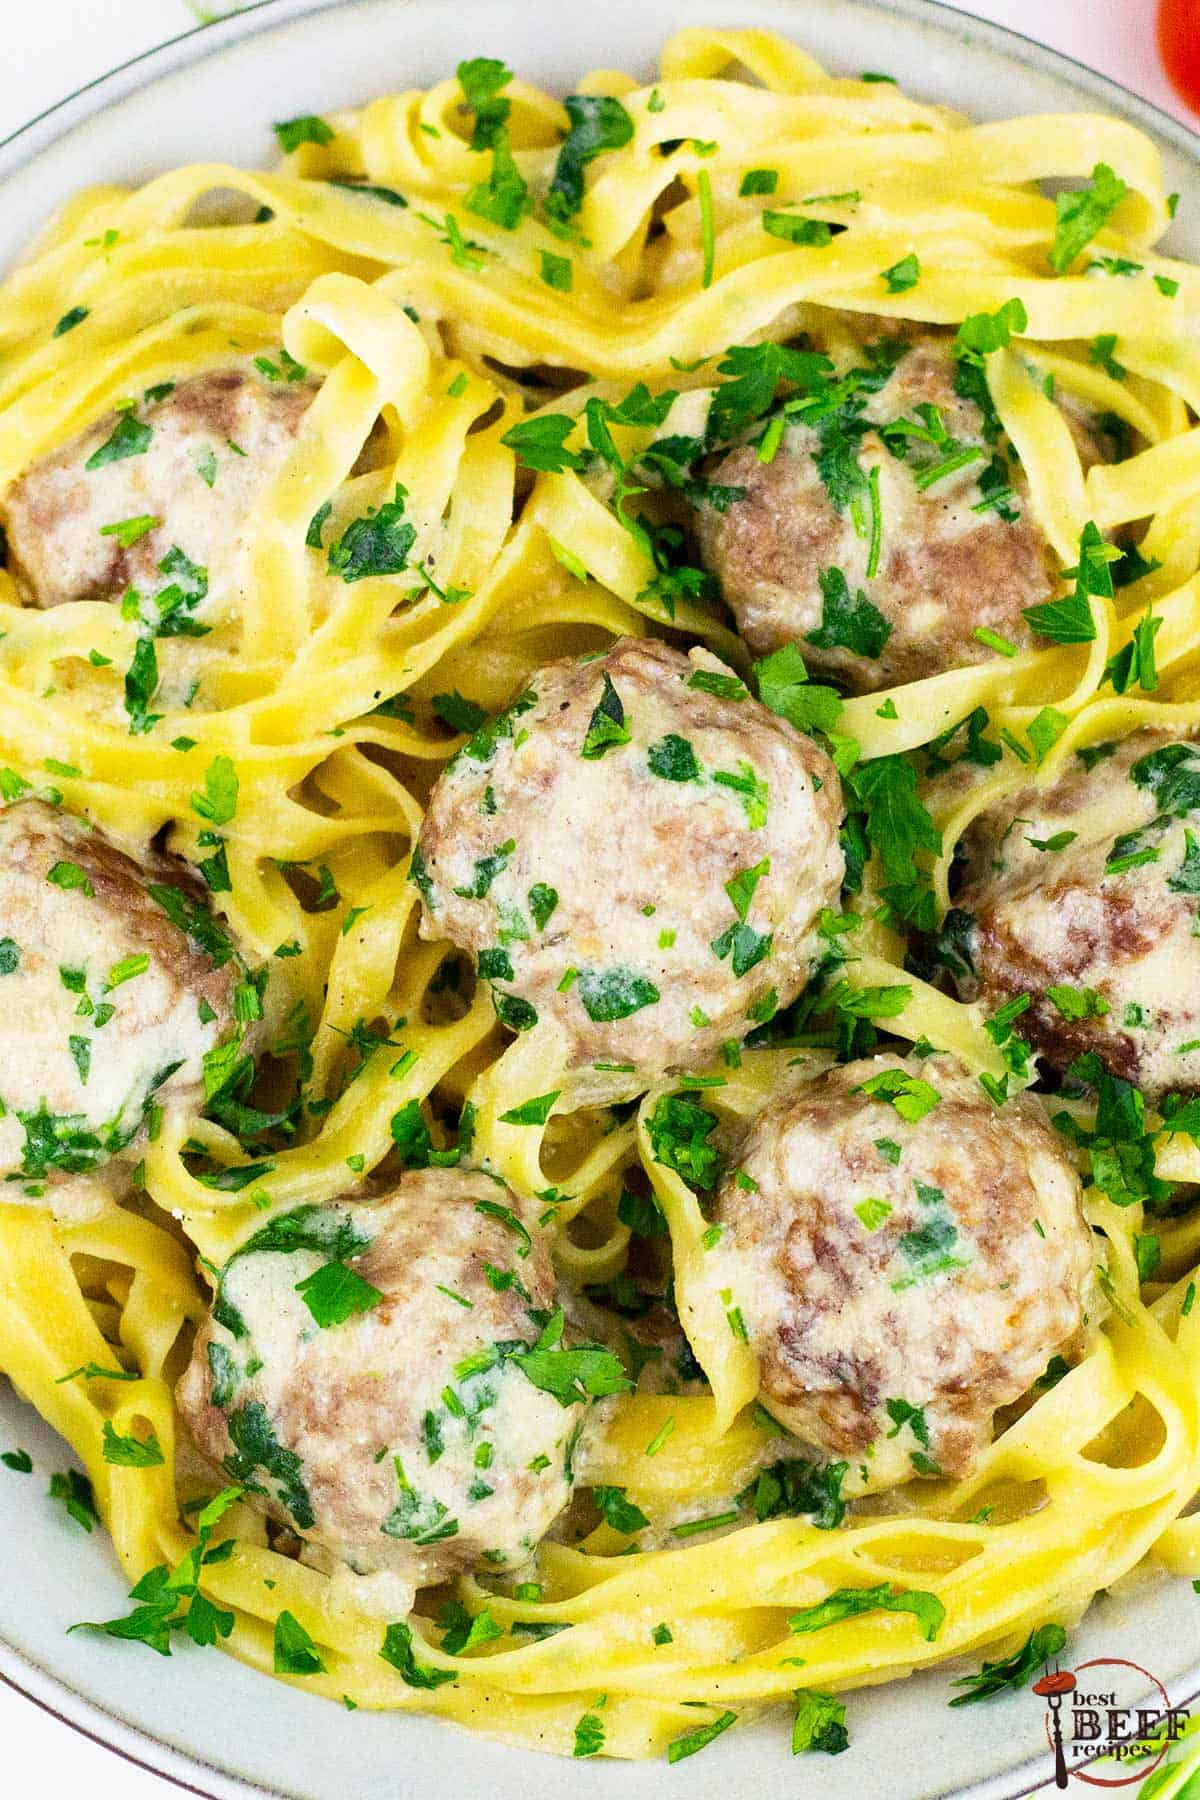 a top down view of a plate of swedish meatballs on a bed of egg noodles, sauce and parsley